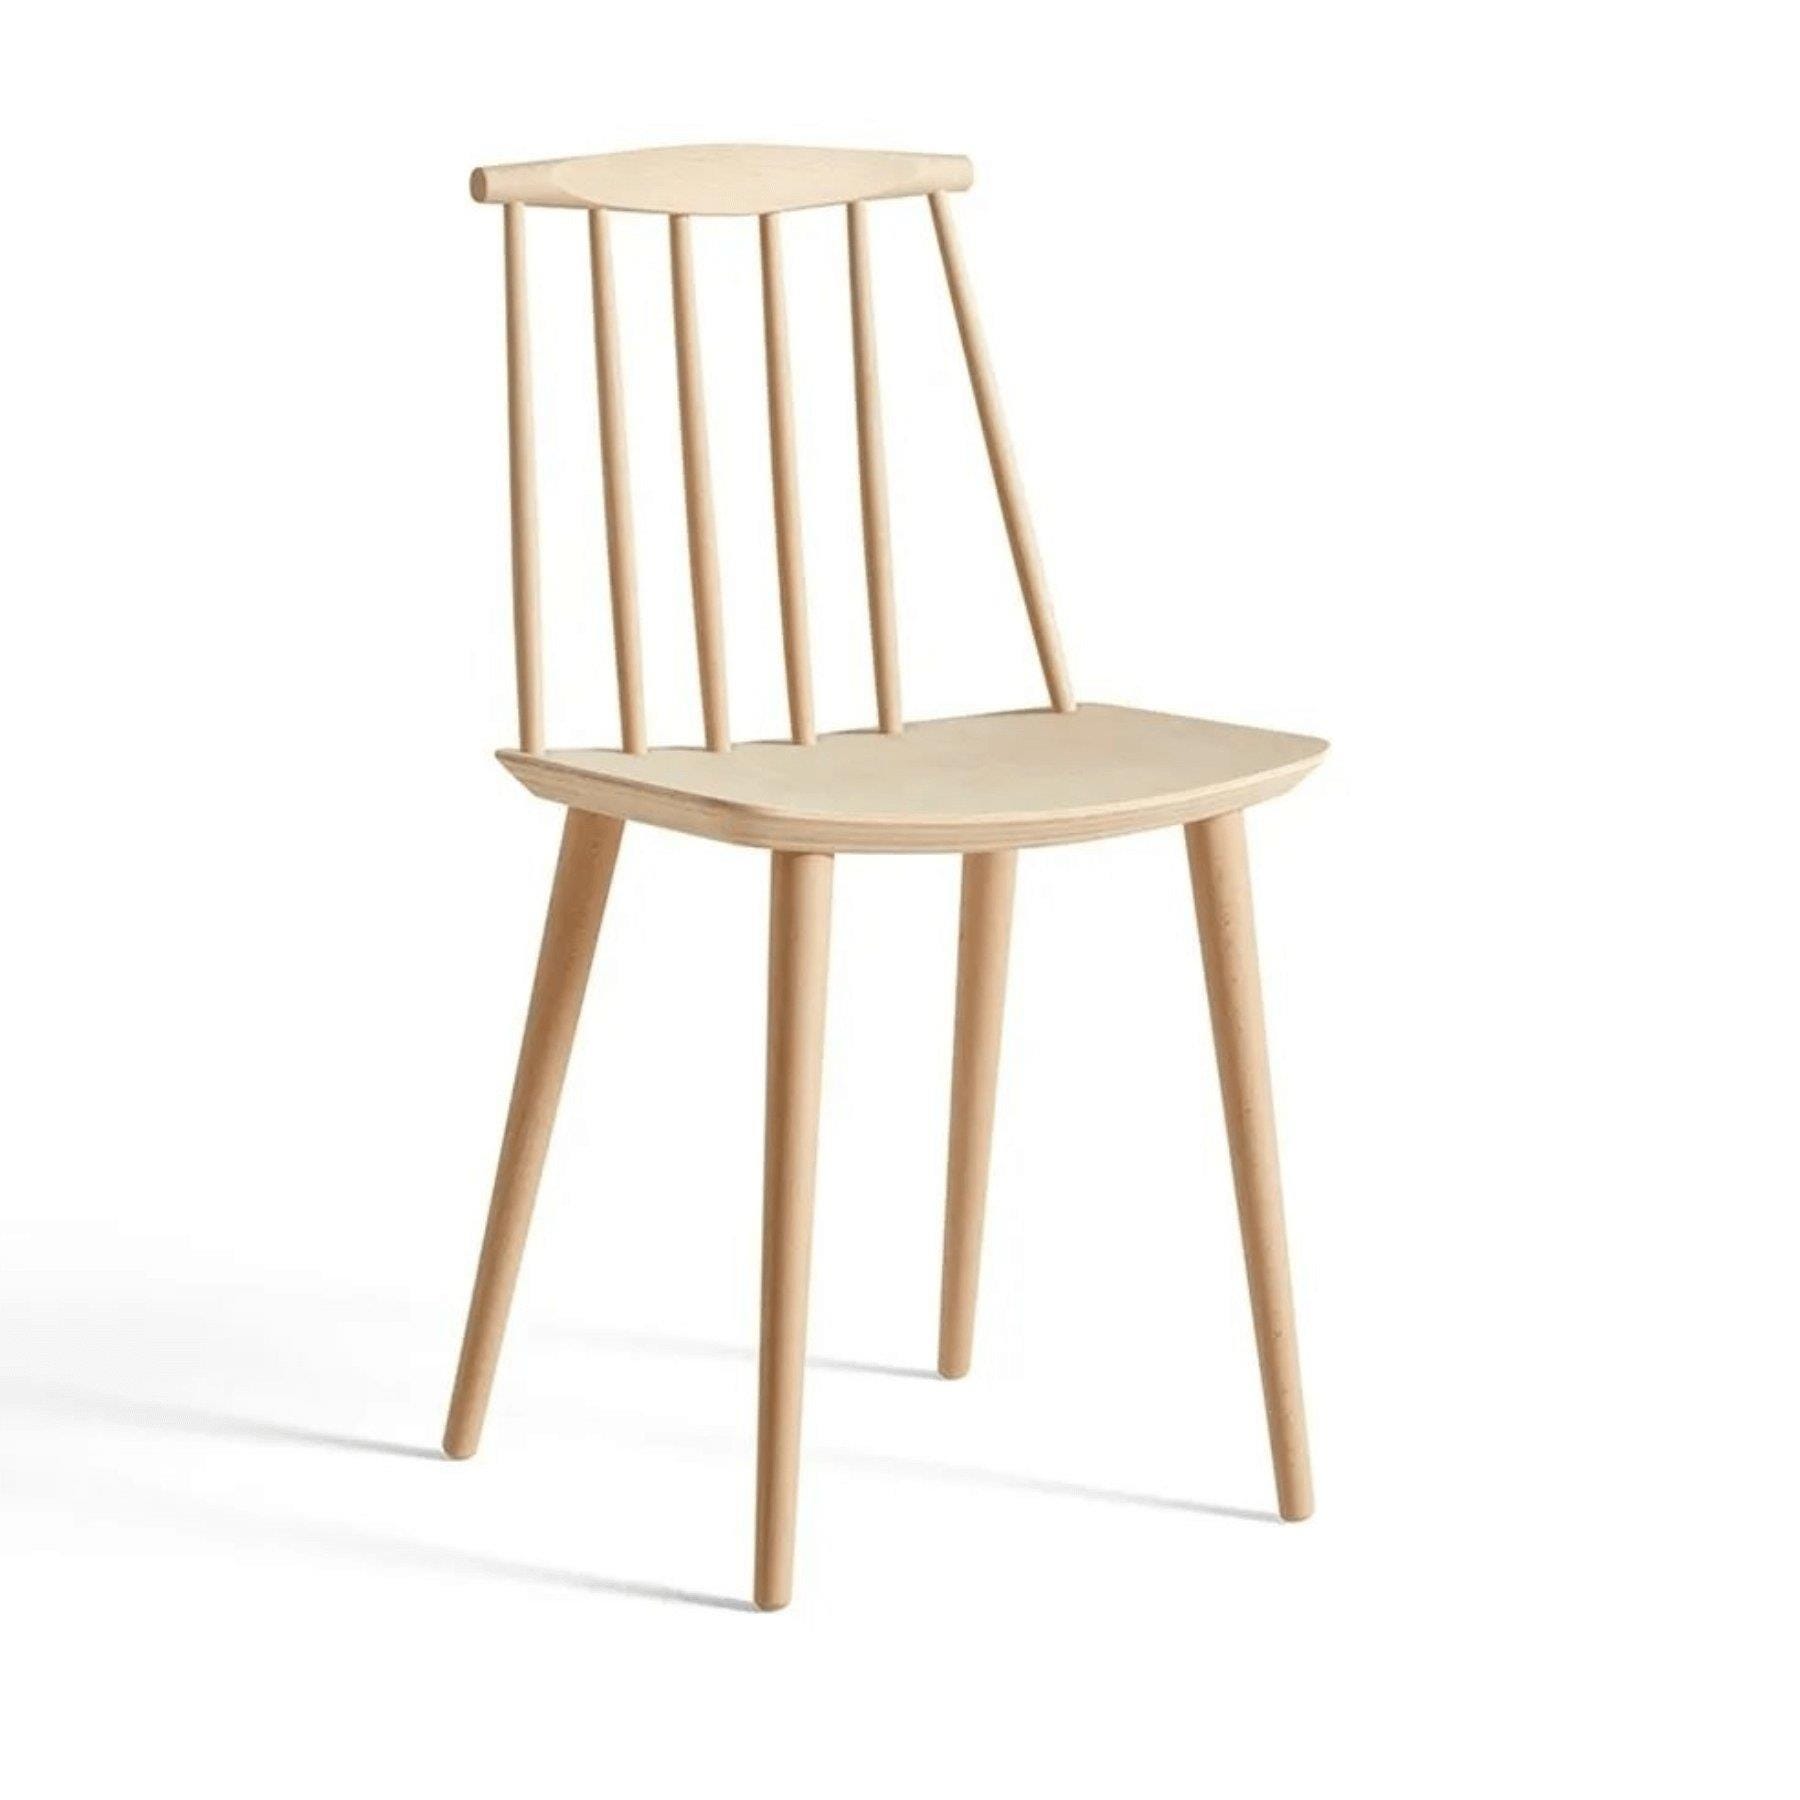 Hay Jseries 77 Dining Chair Oiled Oak Light Wood Designer Furniture From Holloways Of Ludlow